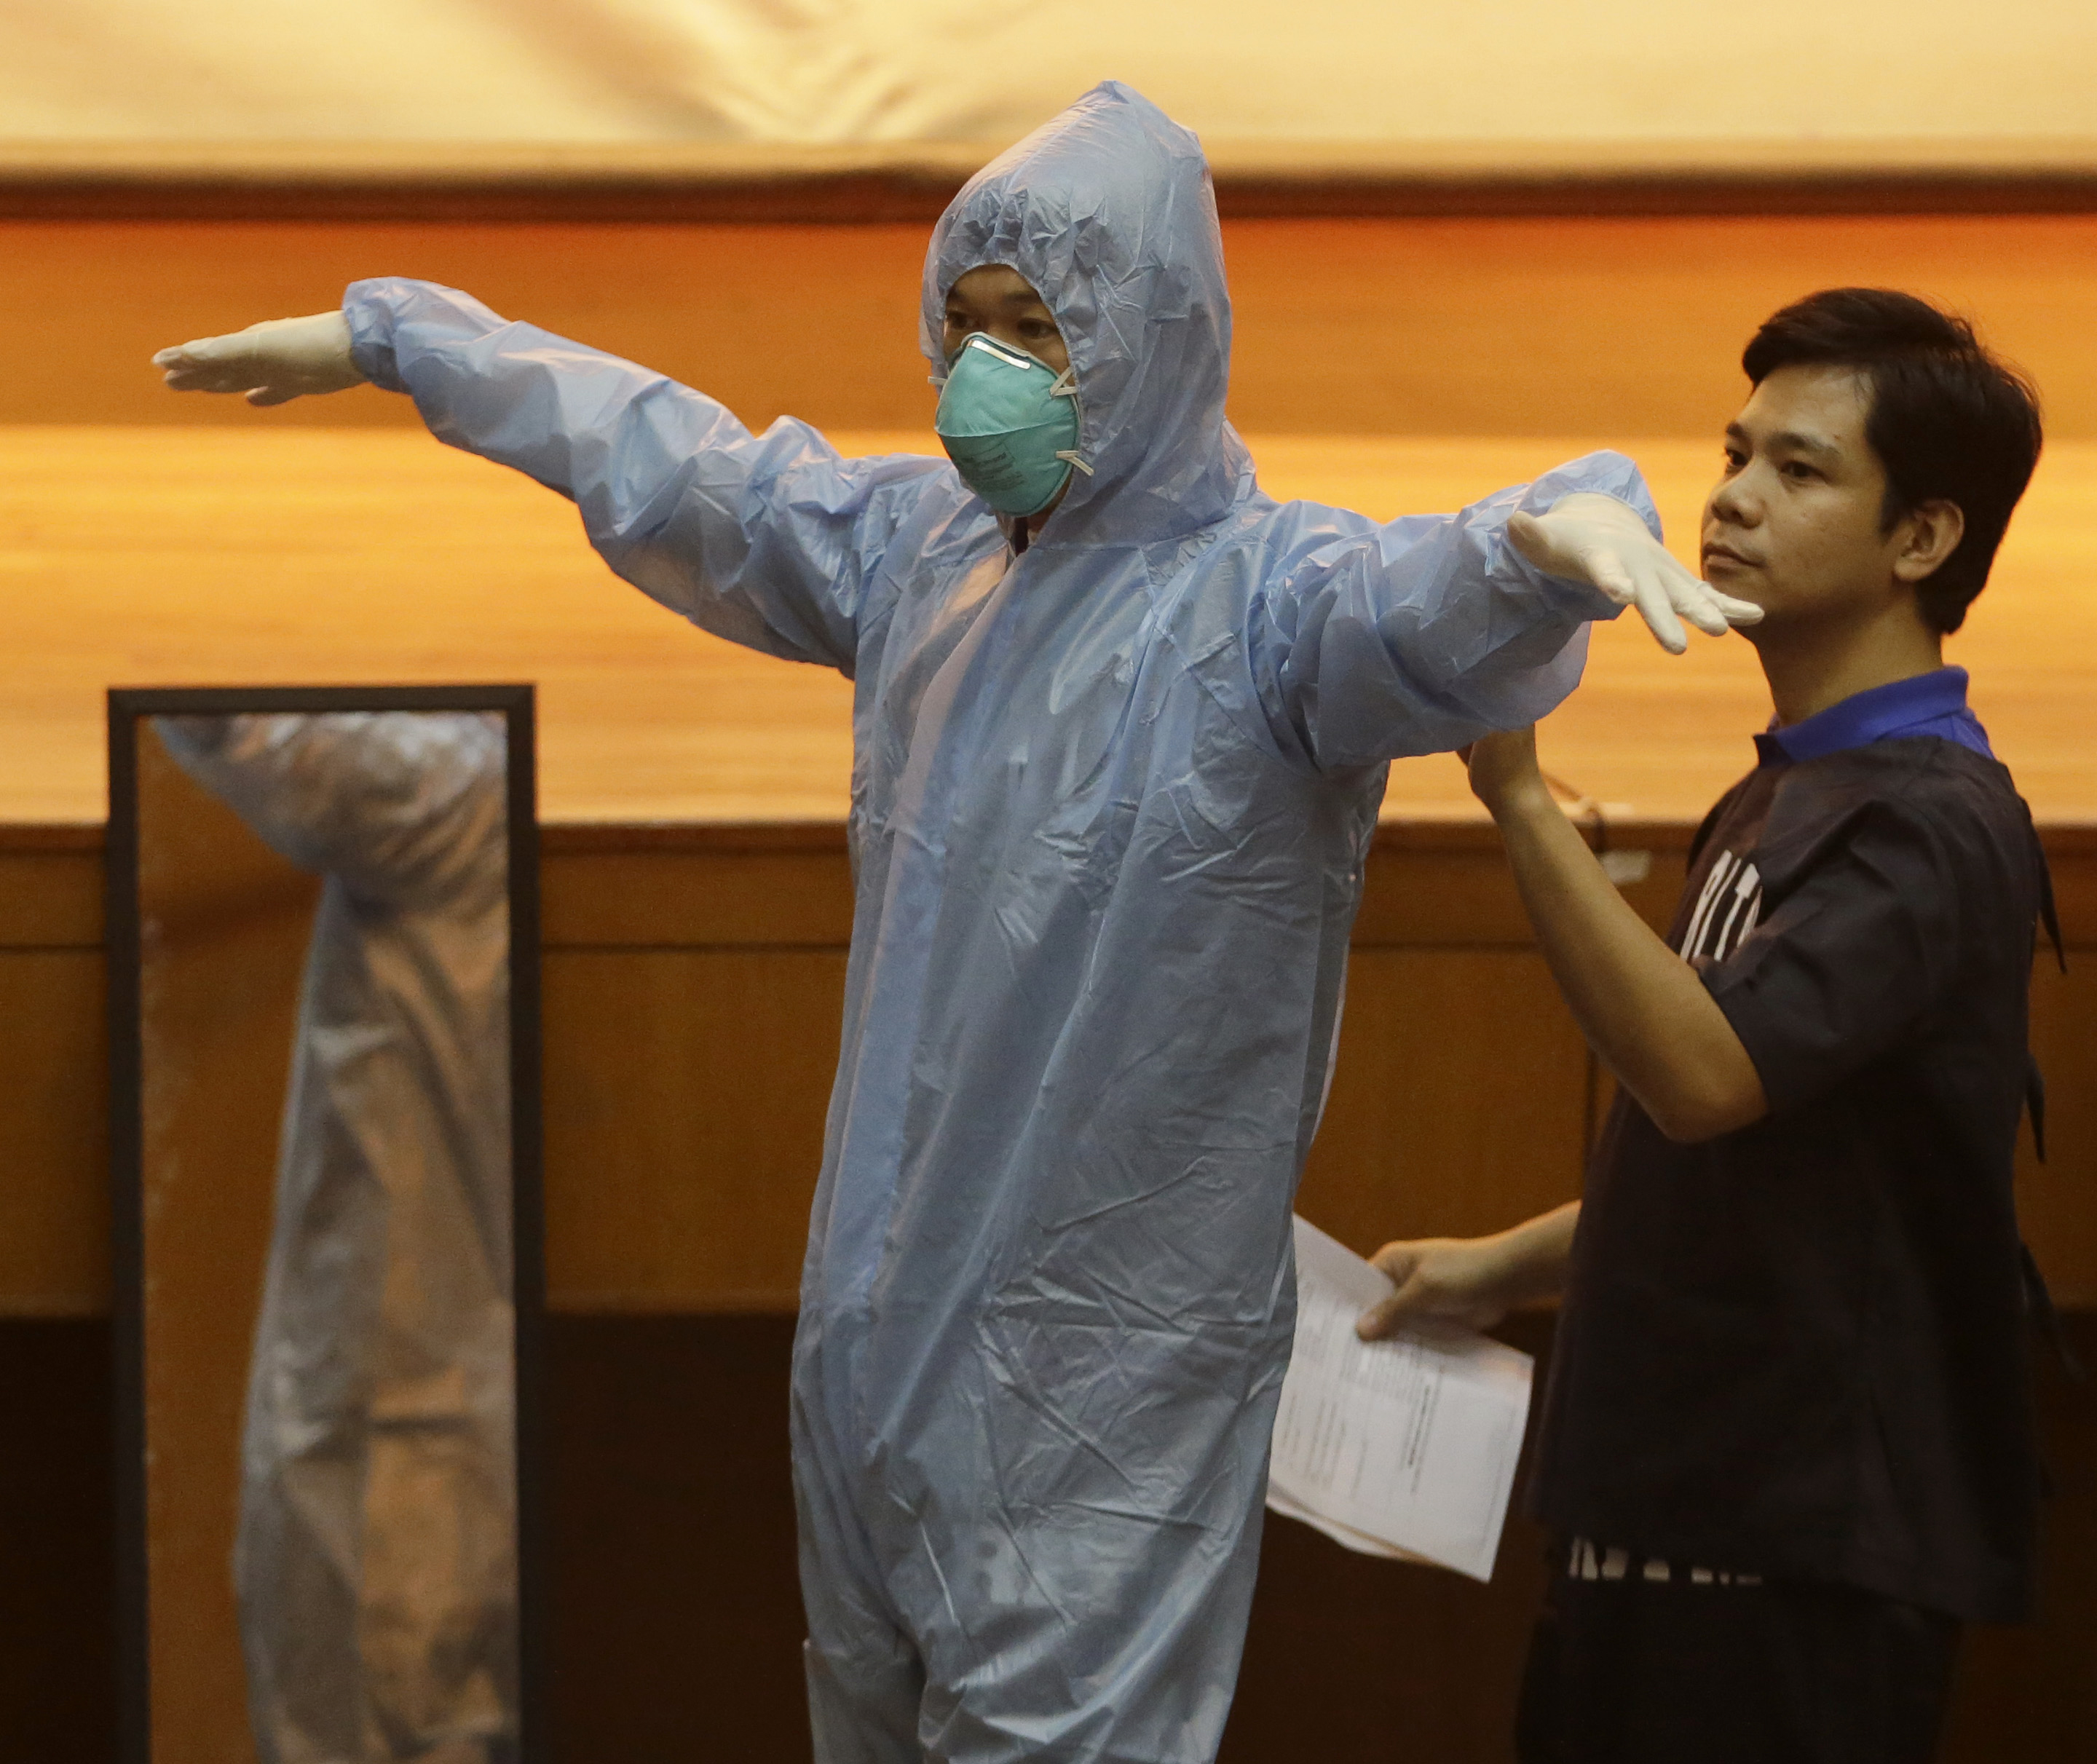 Government health workers practice wearing Ebola protective suits on the first day of training on hospital management for Ebola virus at the Research Institute for Tropical Medicine in the Philippine city of Muntinlupa on Oct. 28, 2014 (Bullit Marquez—AP)